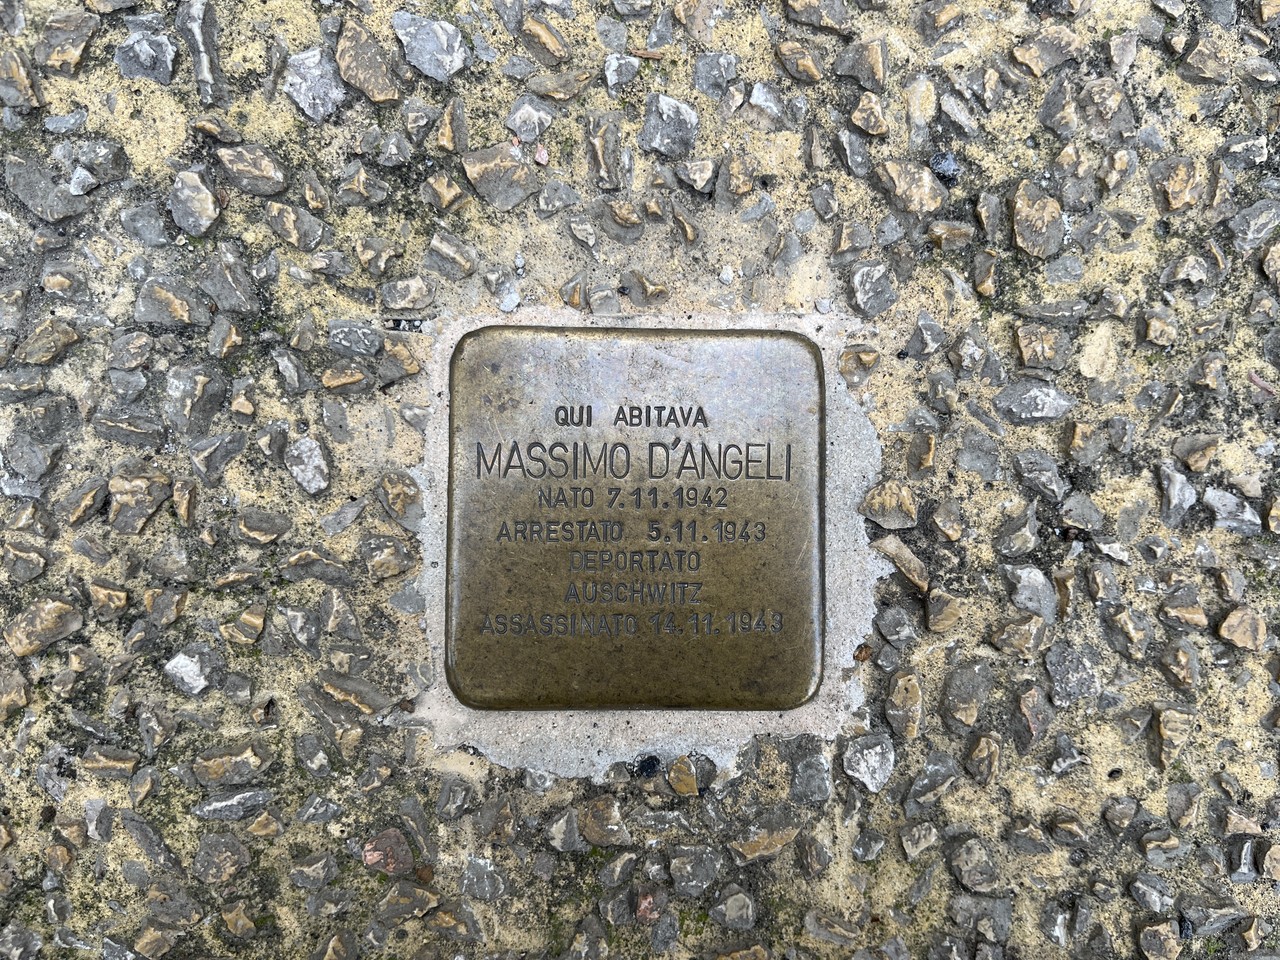 Stumbling stones in memory of the imprisonment of the D'Angeli family